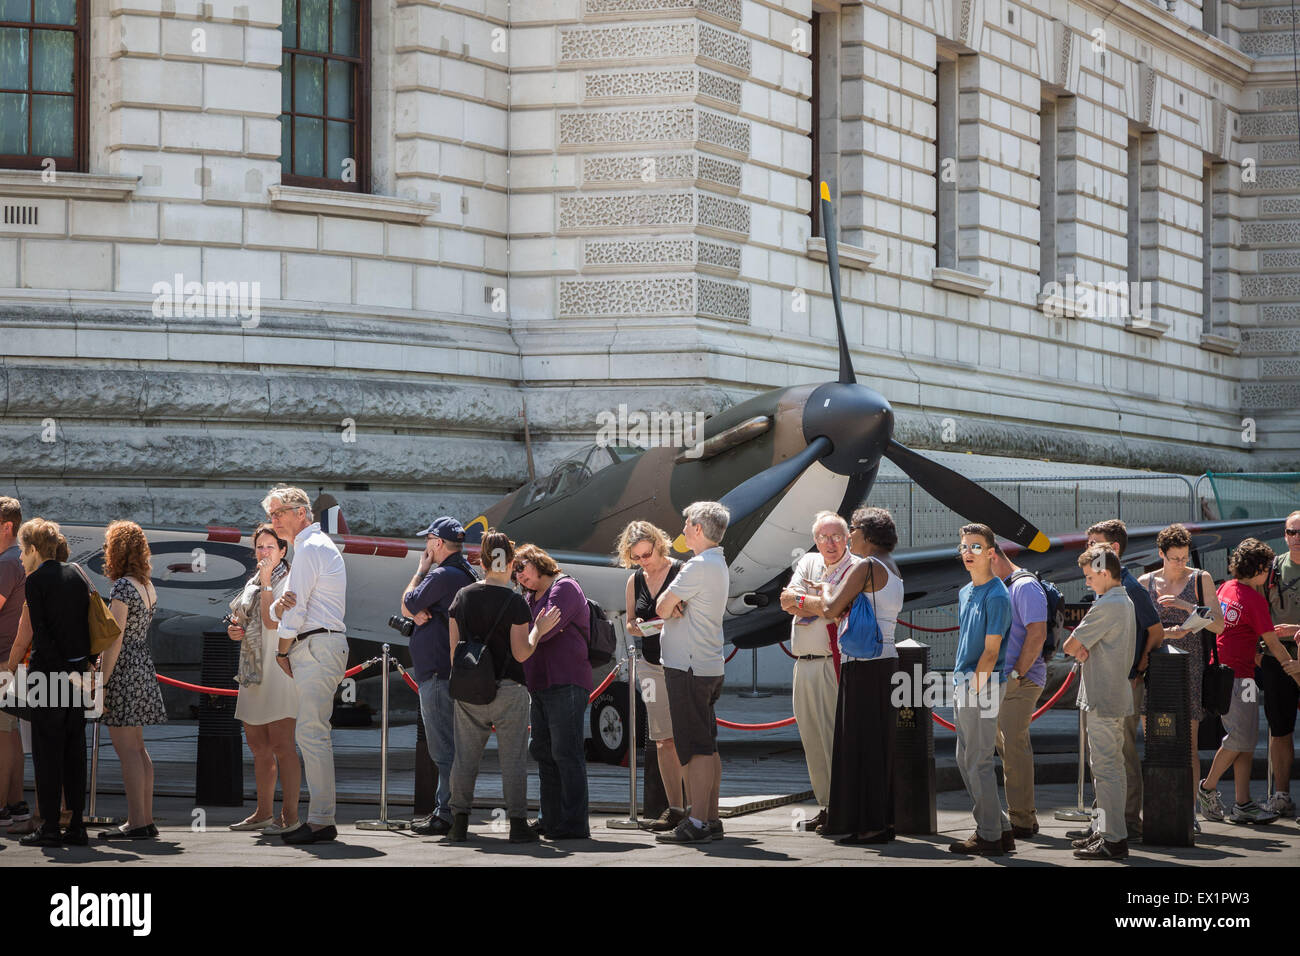 London, UK. 4th July, 2015. A Vickers Supermarine Spitfire Mk 1A aircraft is pictured outside the Churchill War Rooms before its sale by Christie’s auction house Credit:  Guy Corbishley/Alamy Live News Stock Photo